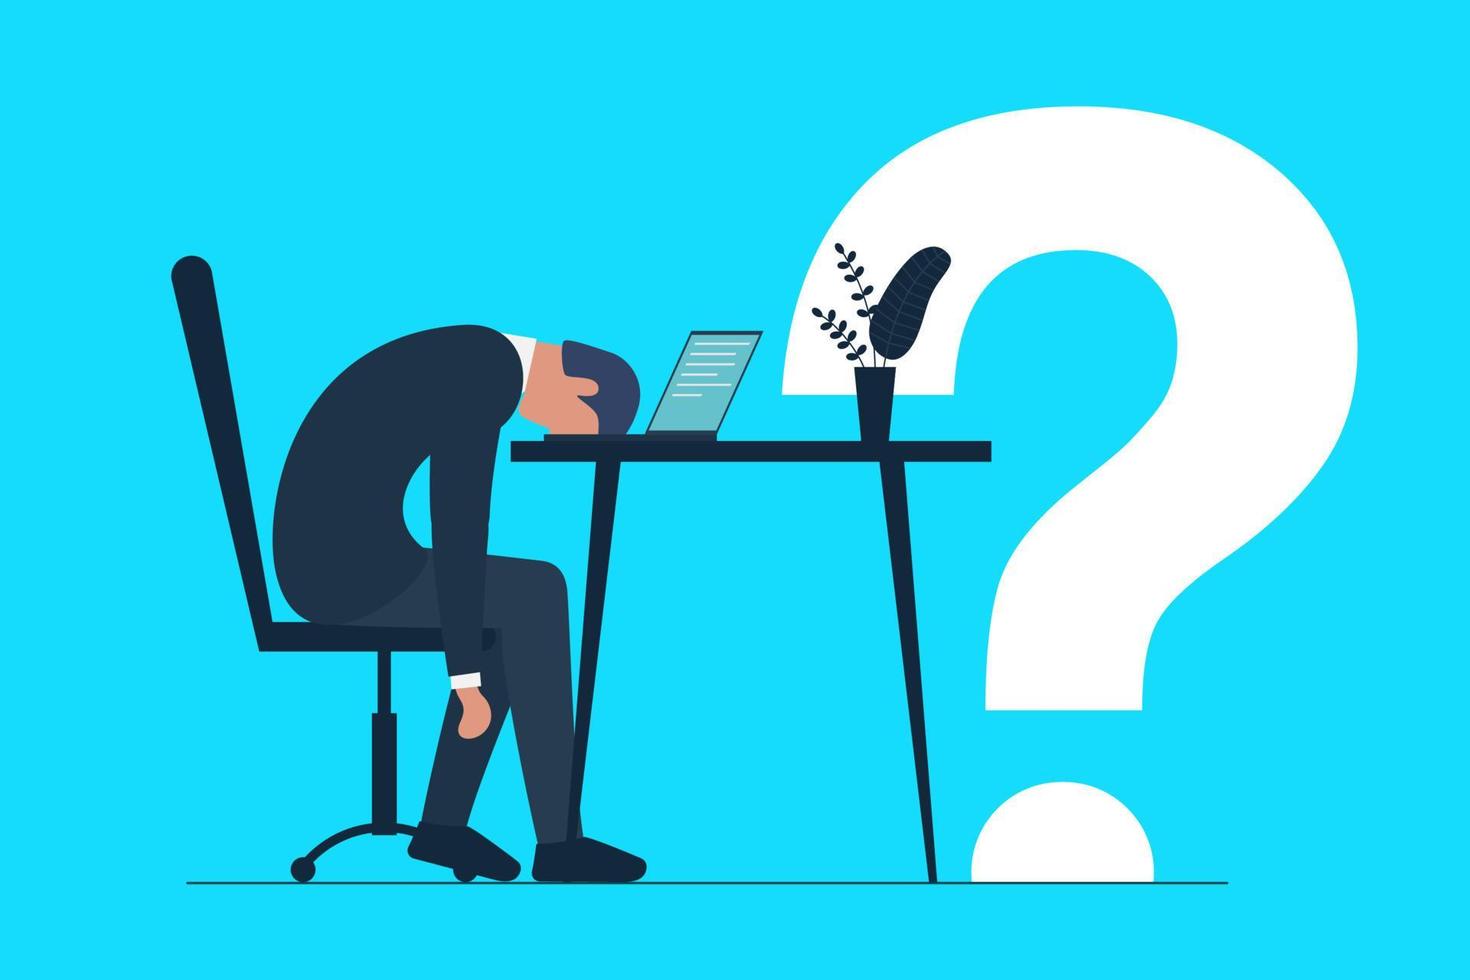 Exhausted sick tired man in office sad boring sitting no idea head down on laptop with large question mark. Frustrated worker mental health problem. Professional burnout syndrome. Vector long work day